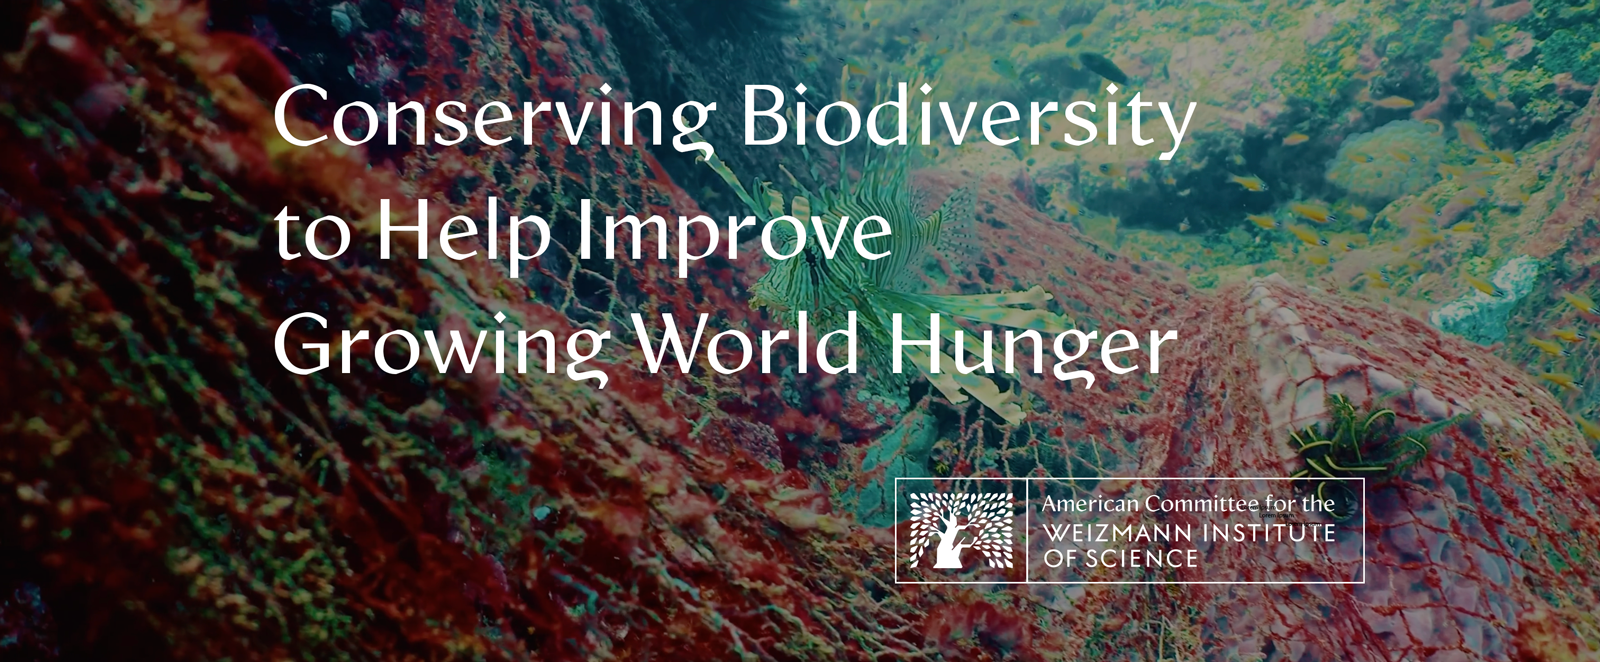 Conserving Biodiversity to Help Improve Growing World Hunger